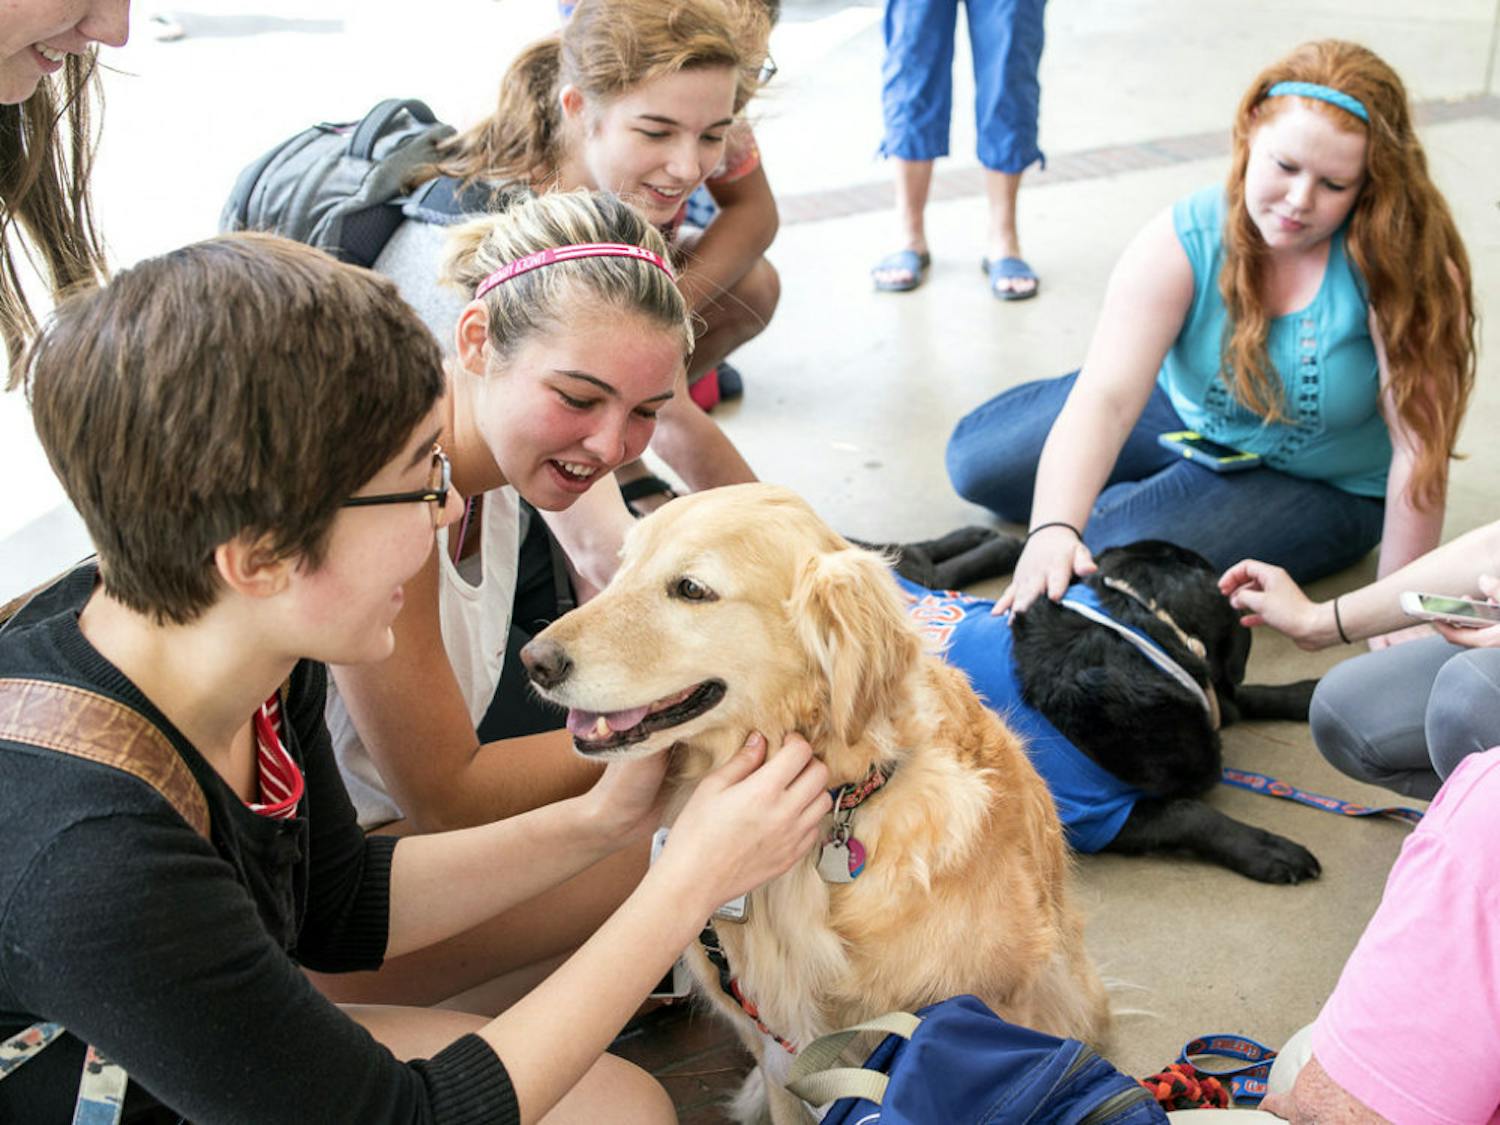 Fara, a 7-year-old golden retriever from Love on a Leash, was one of two dogs who visited students outside Library West during finals relaxation week.